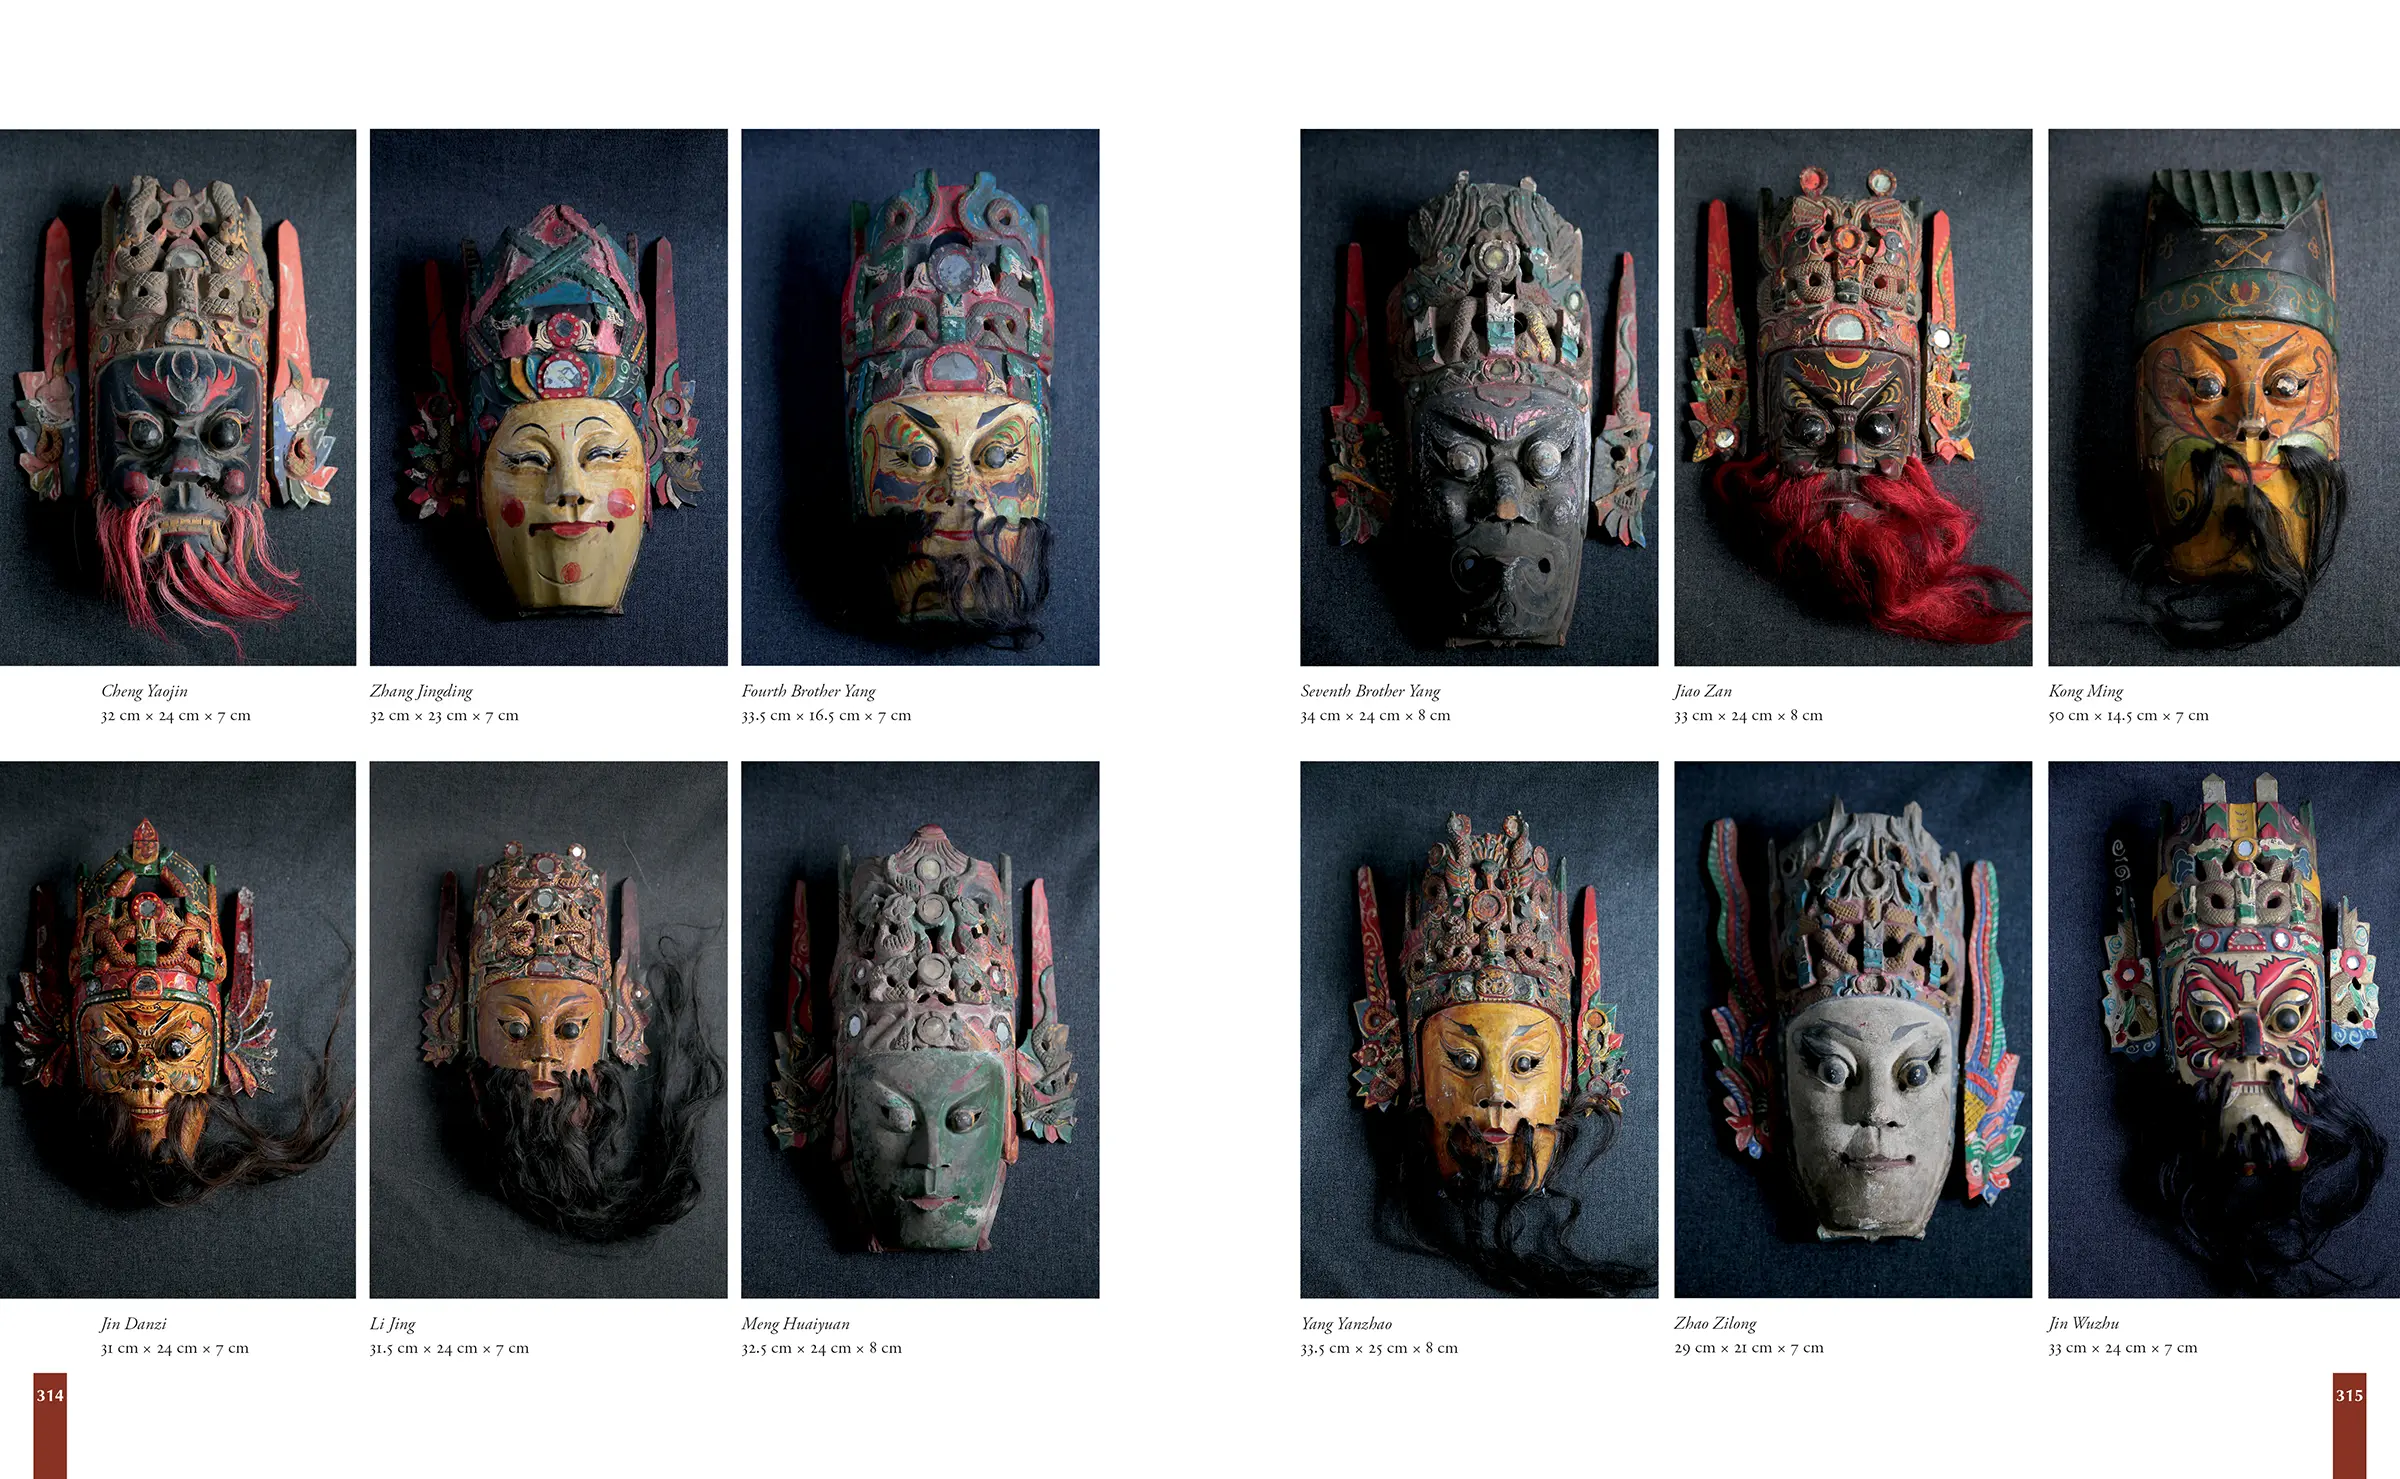 Tujia Paintings and Woodcarvings in Guizhou and Their Development in the Qing Dynasty_interior pages